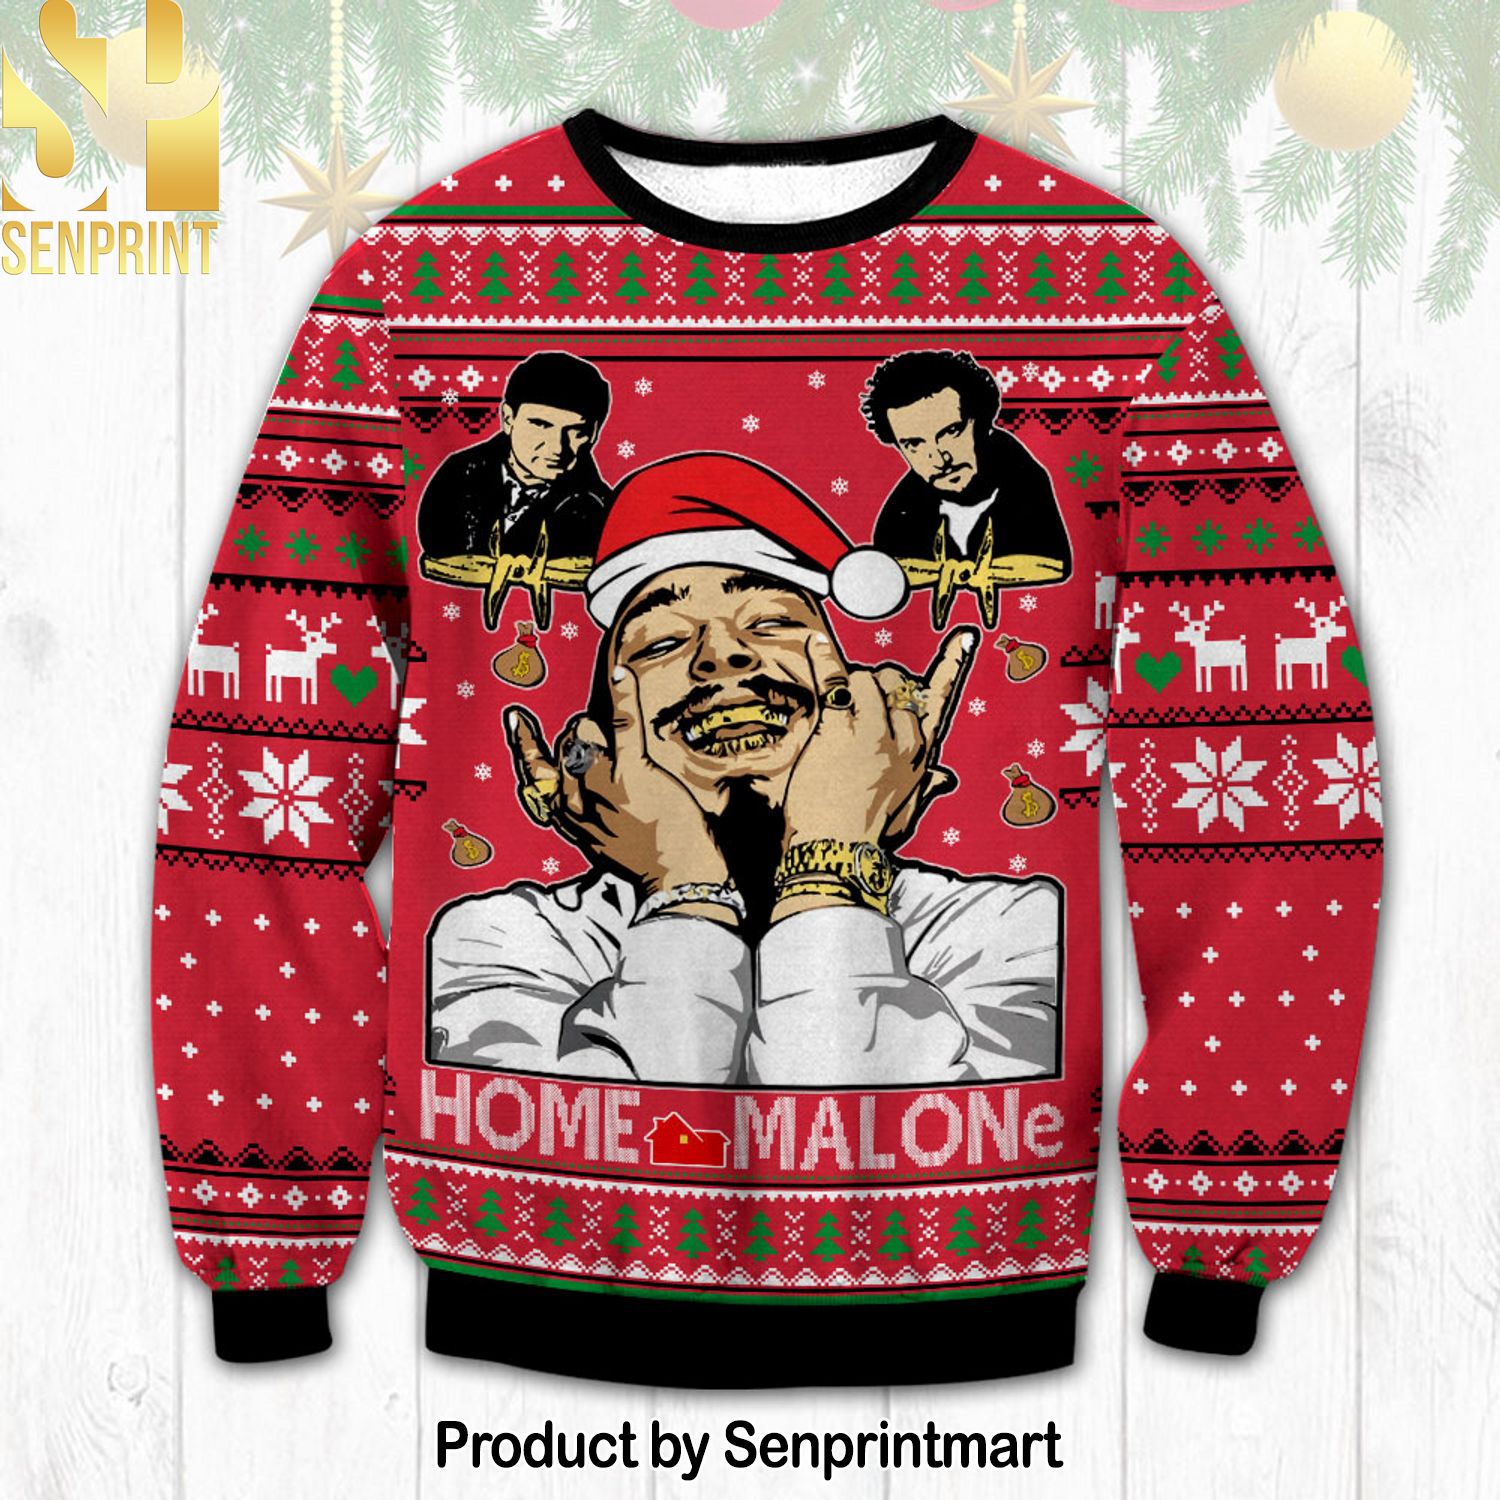 Home Malone Post Malones For Christmas Gifts Ugly Christmas Sweater